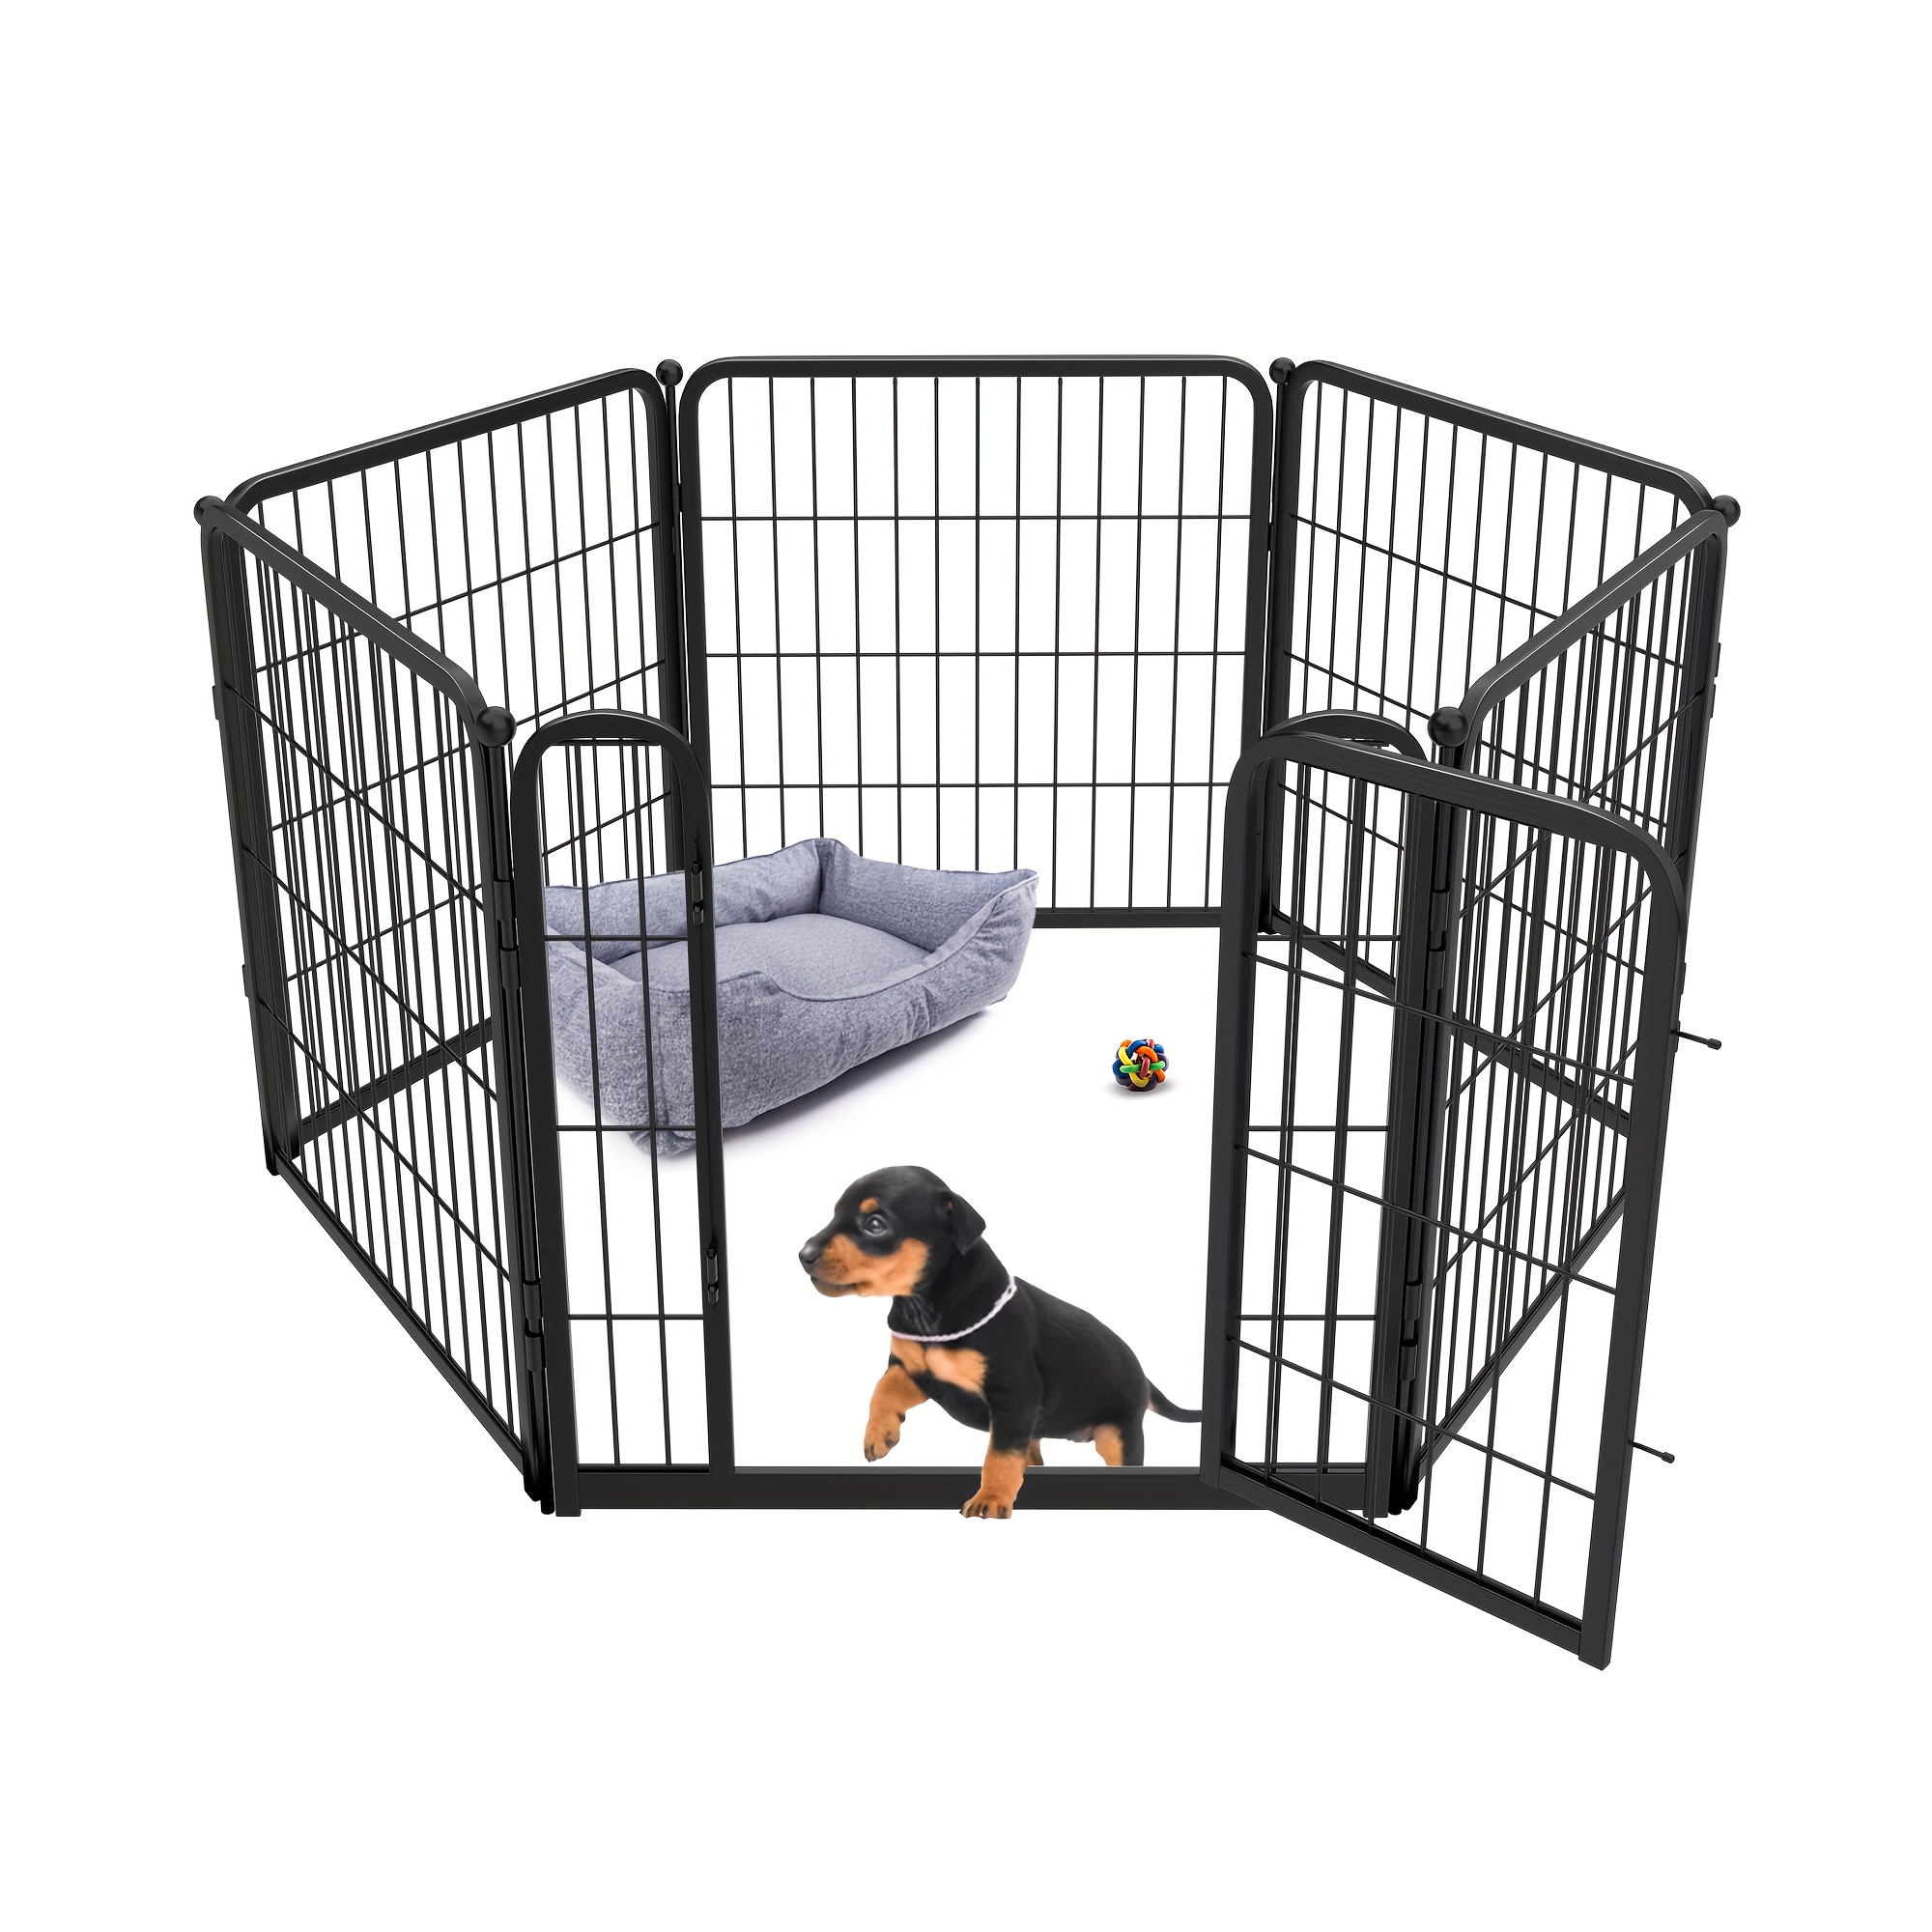 

Fxw Dog Playpen Designed For Indoor Use, 24" Height For Puppy And Small Dogs, Patented